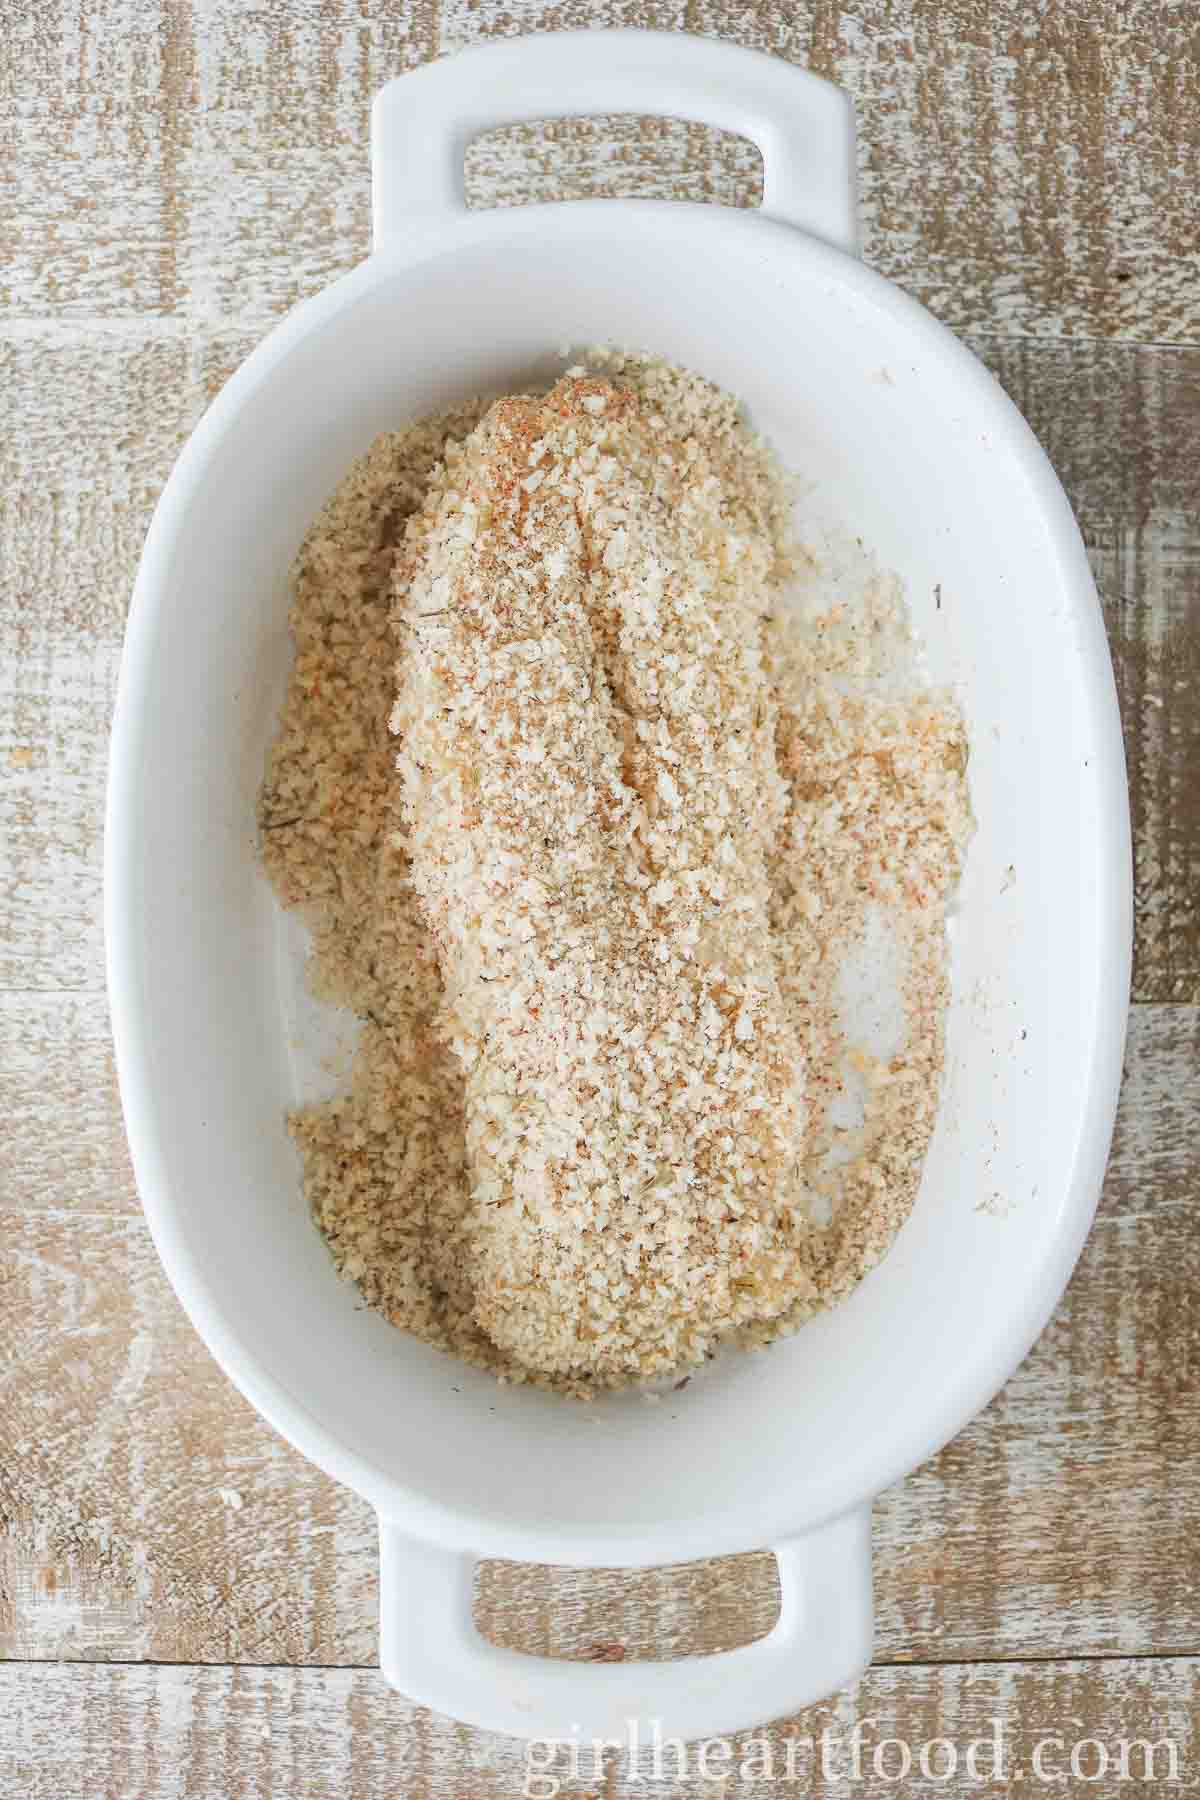 Fillet of cod with panko bread crumbs in a white dish.